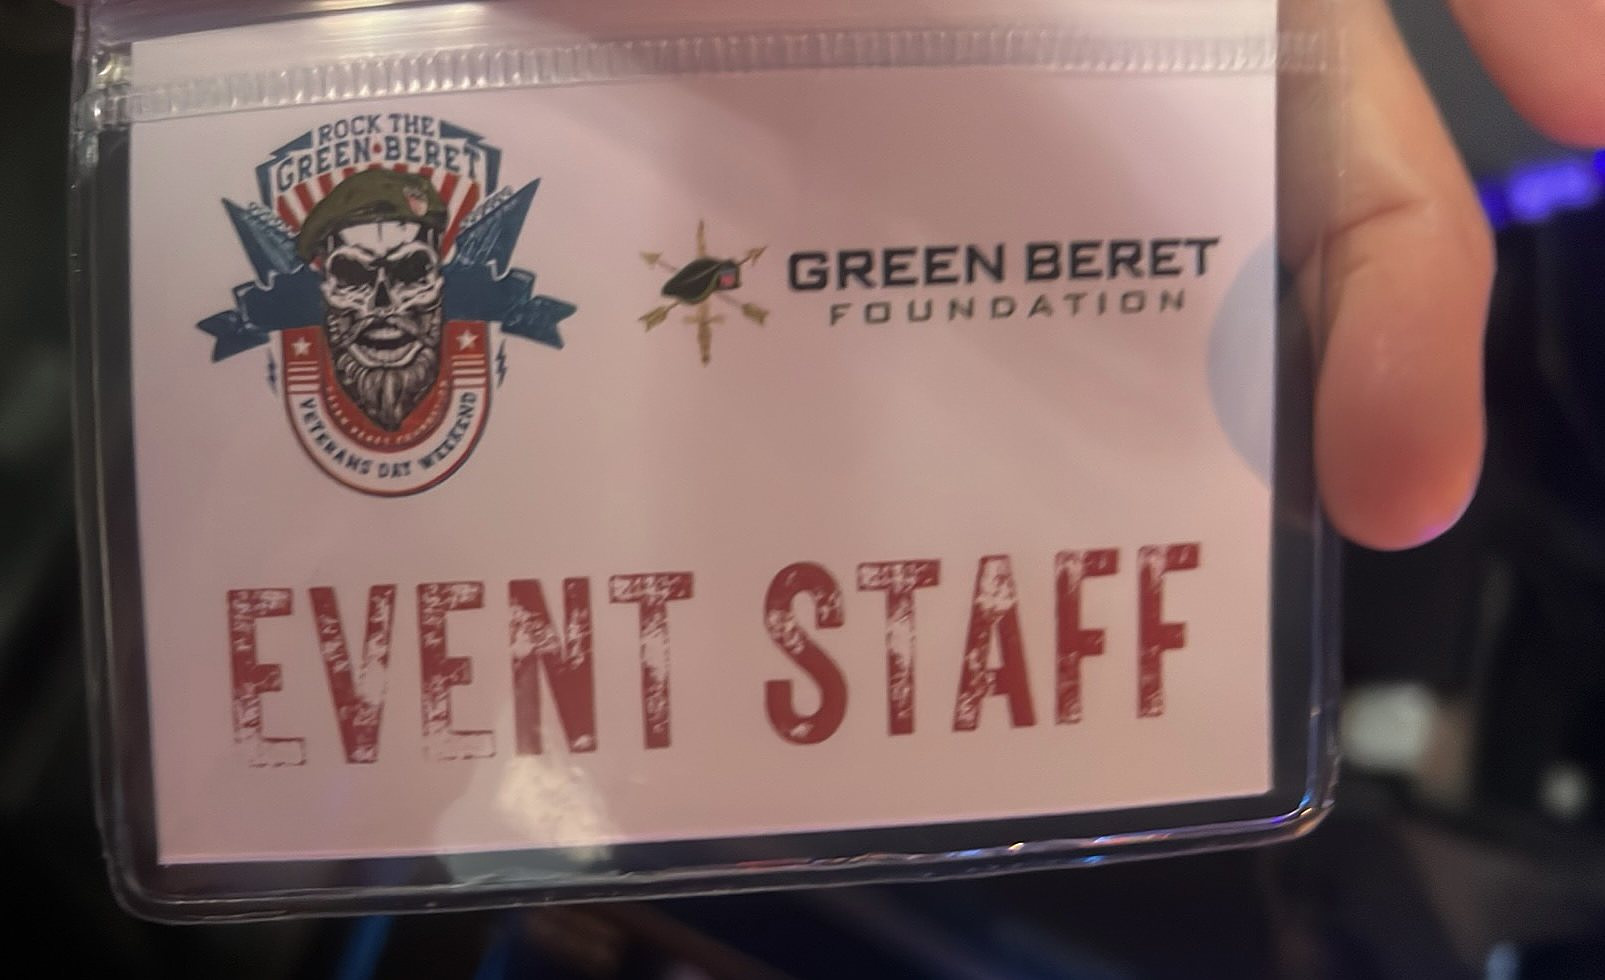 ROCK THE GREEN BERET 2022 ( private event )